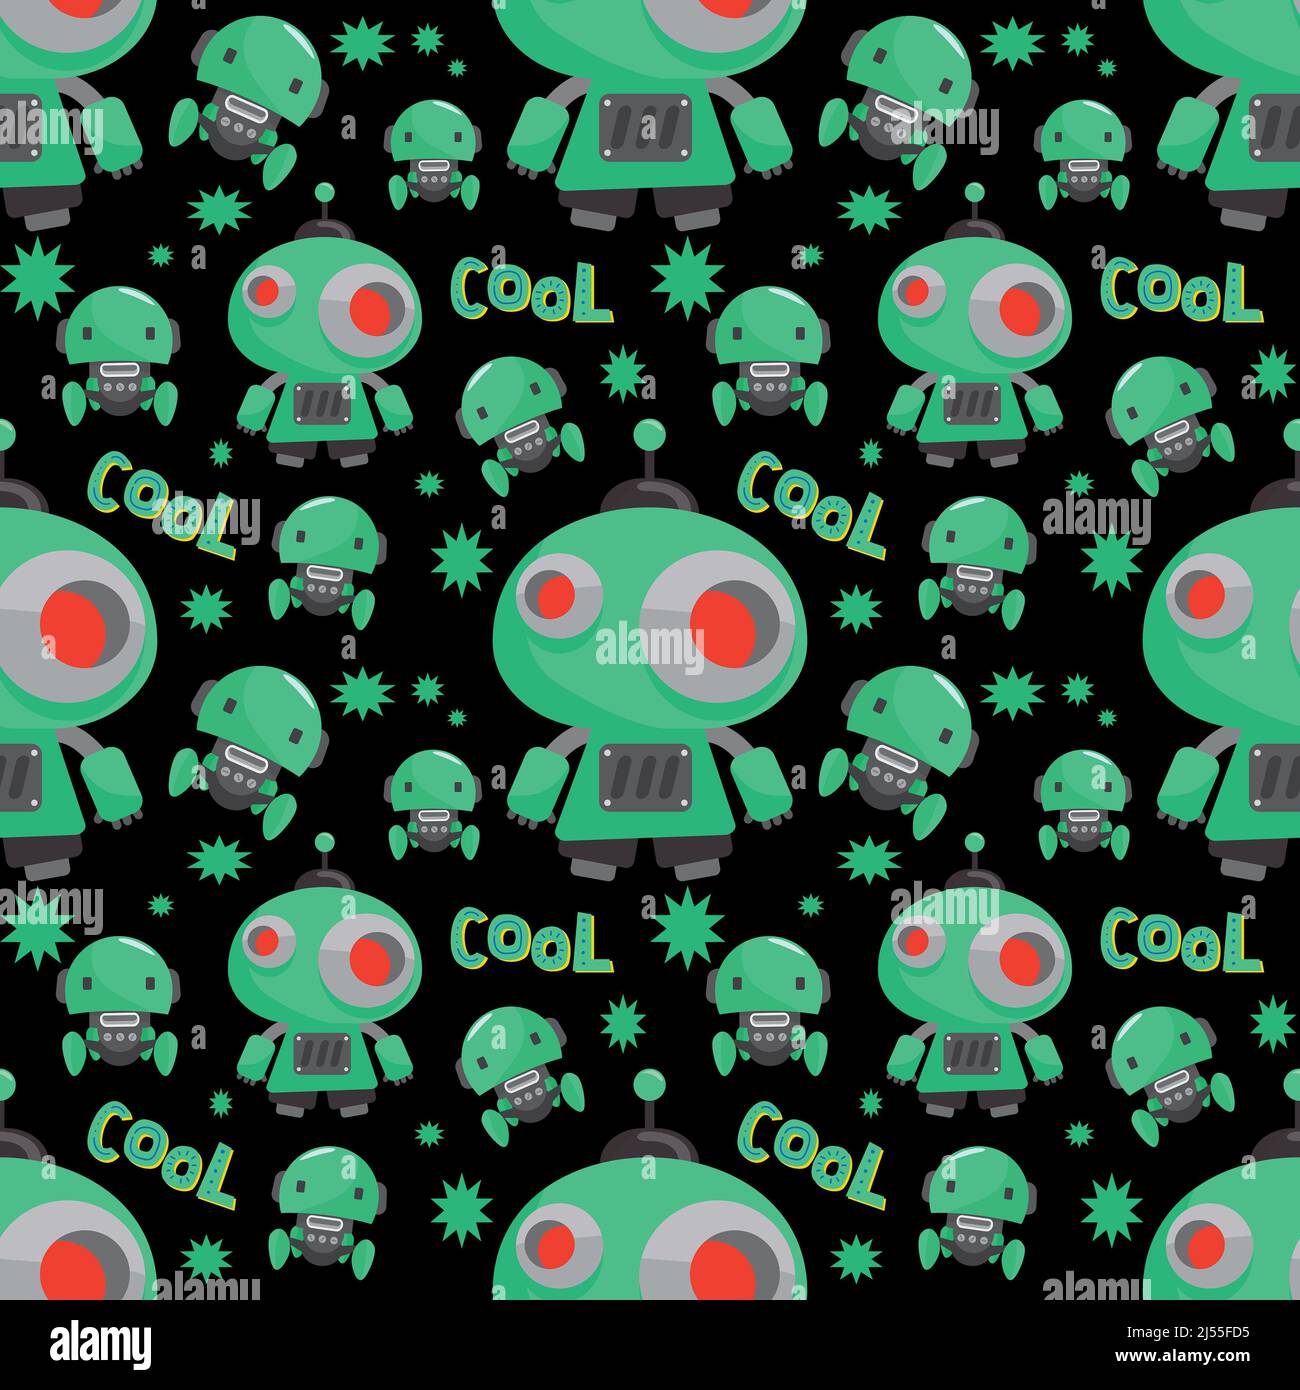 Little green robot repeat pattern on black background for robotics and technology lovers in this design element robot pattern. Stock Photo